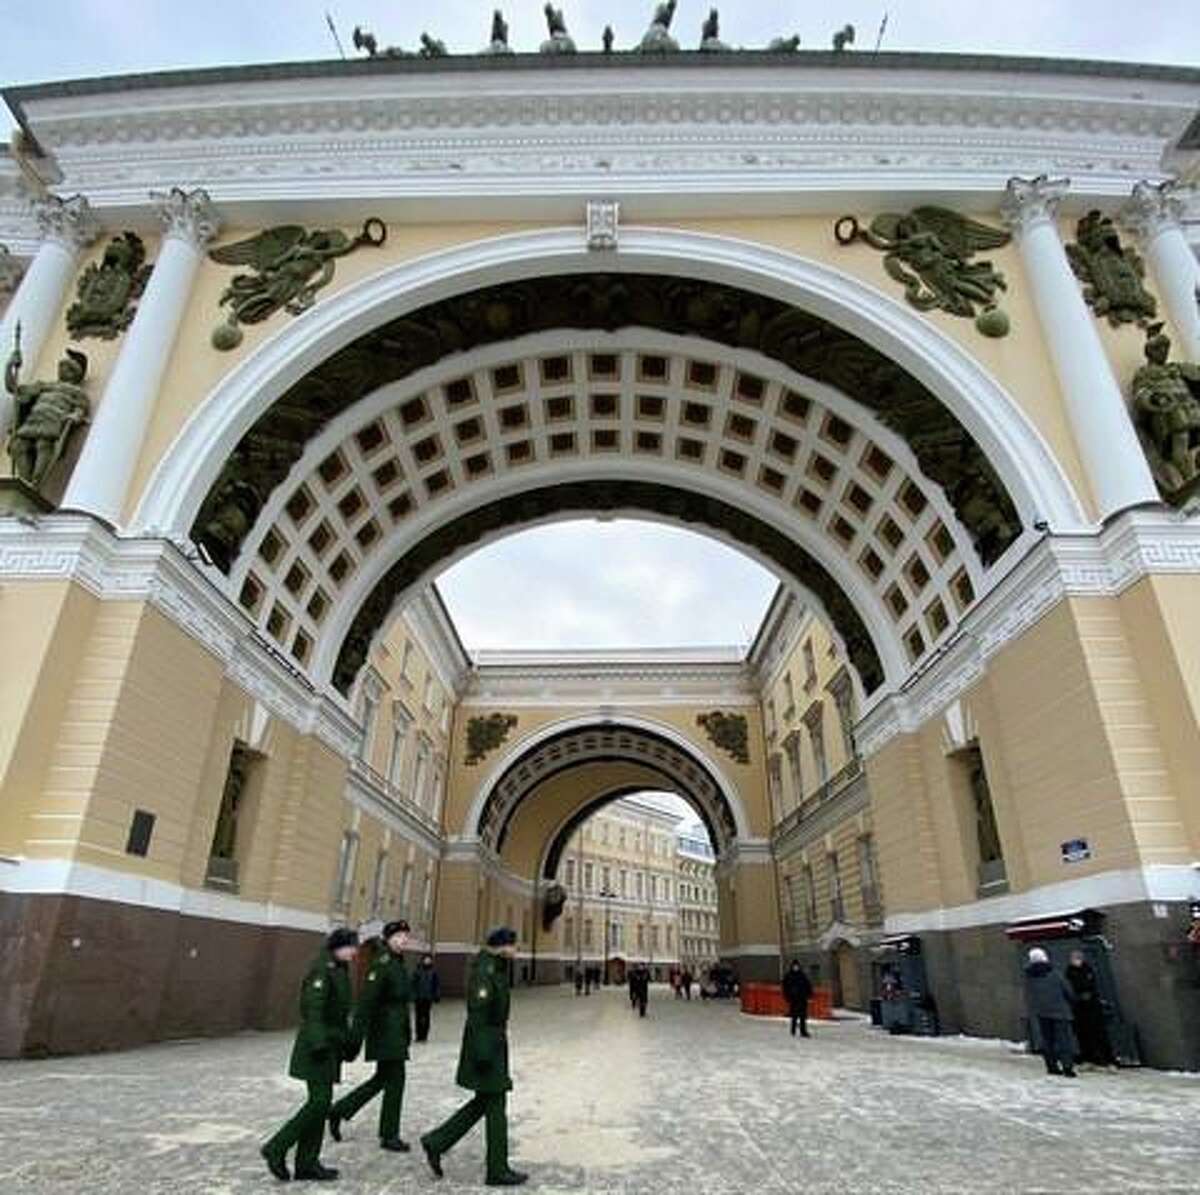 Soldiers patrolling Palace Square, St. Petersburg.